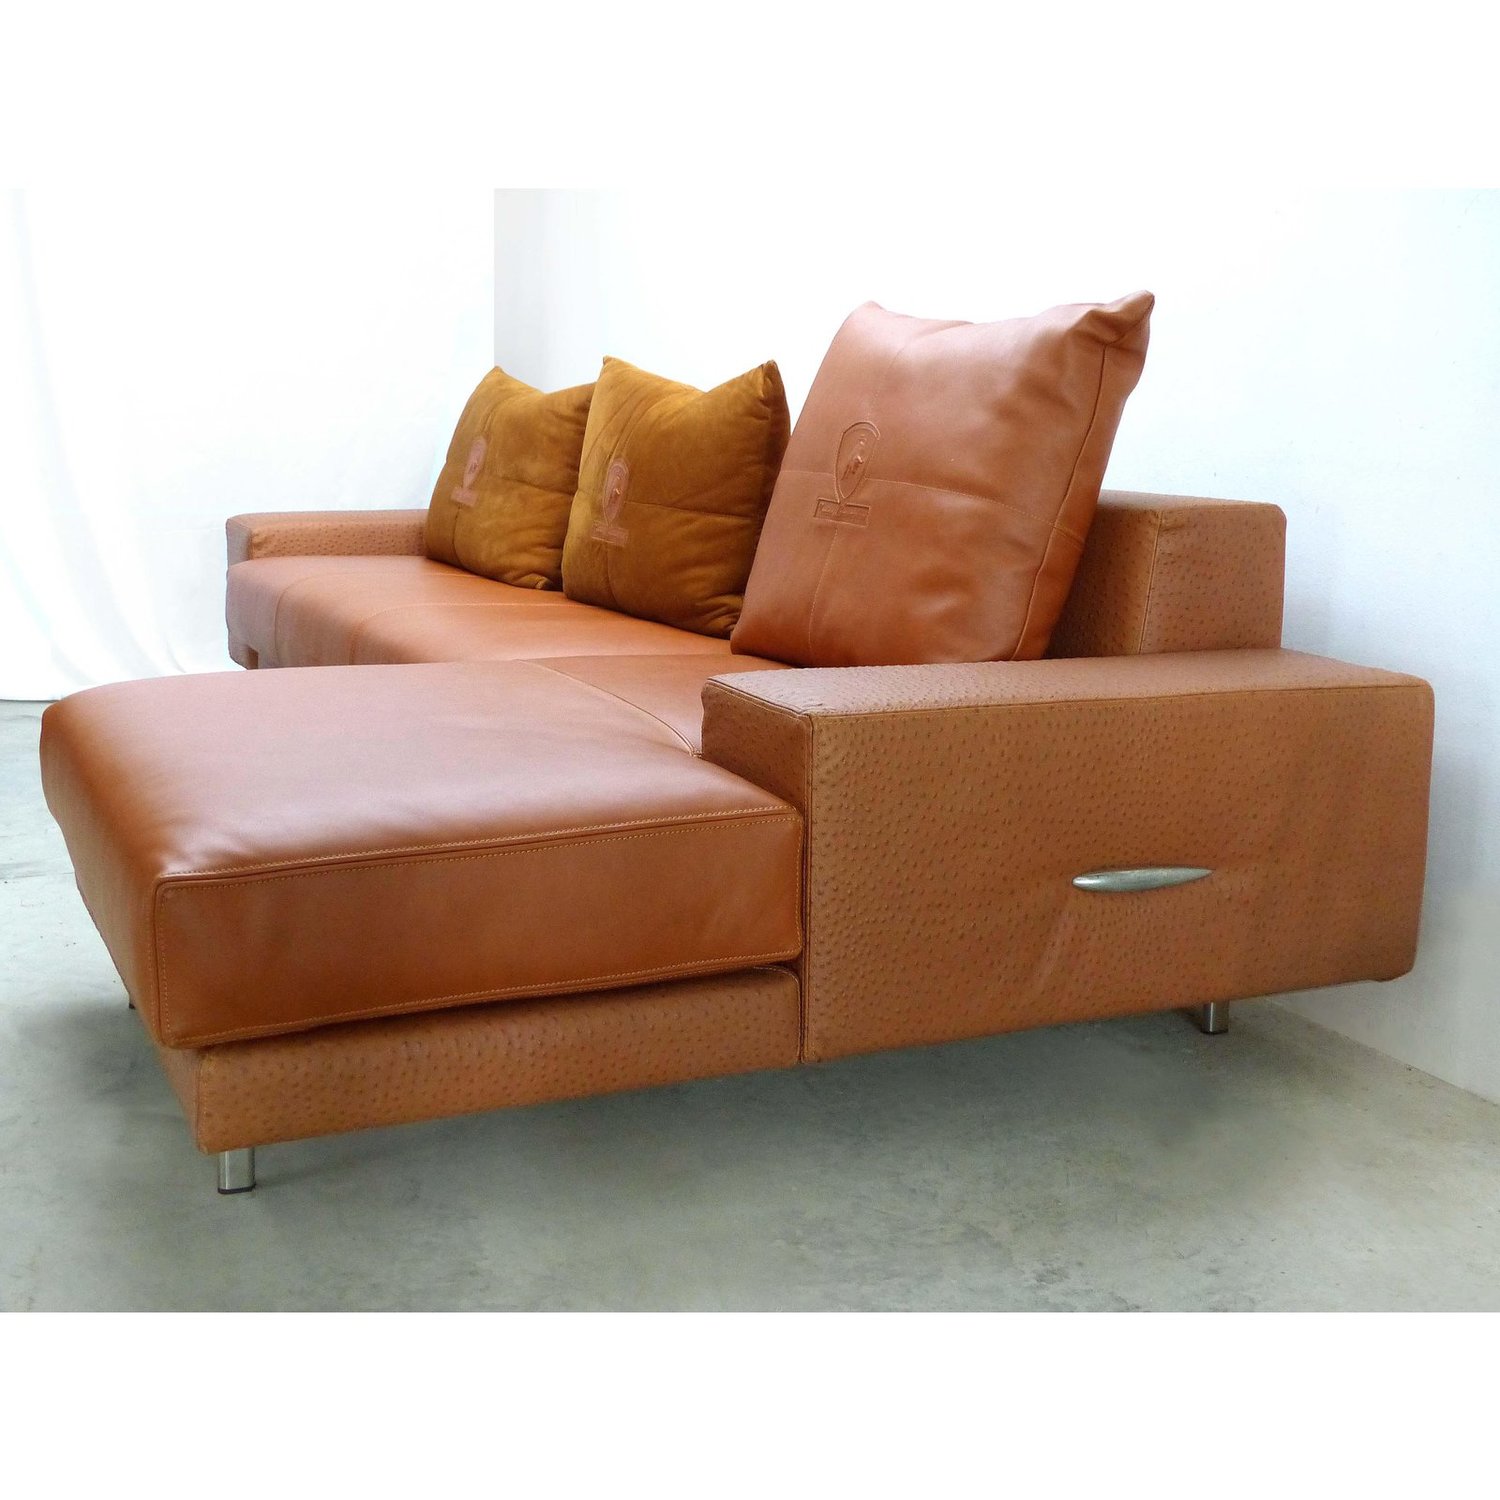 Iconic Design Gallery, Ostrich Leather Couch